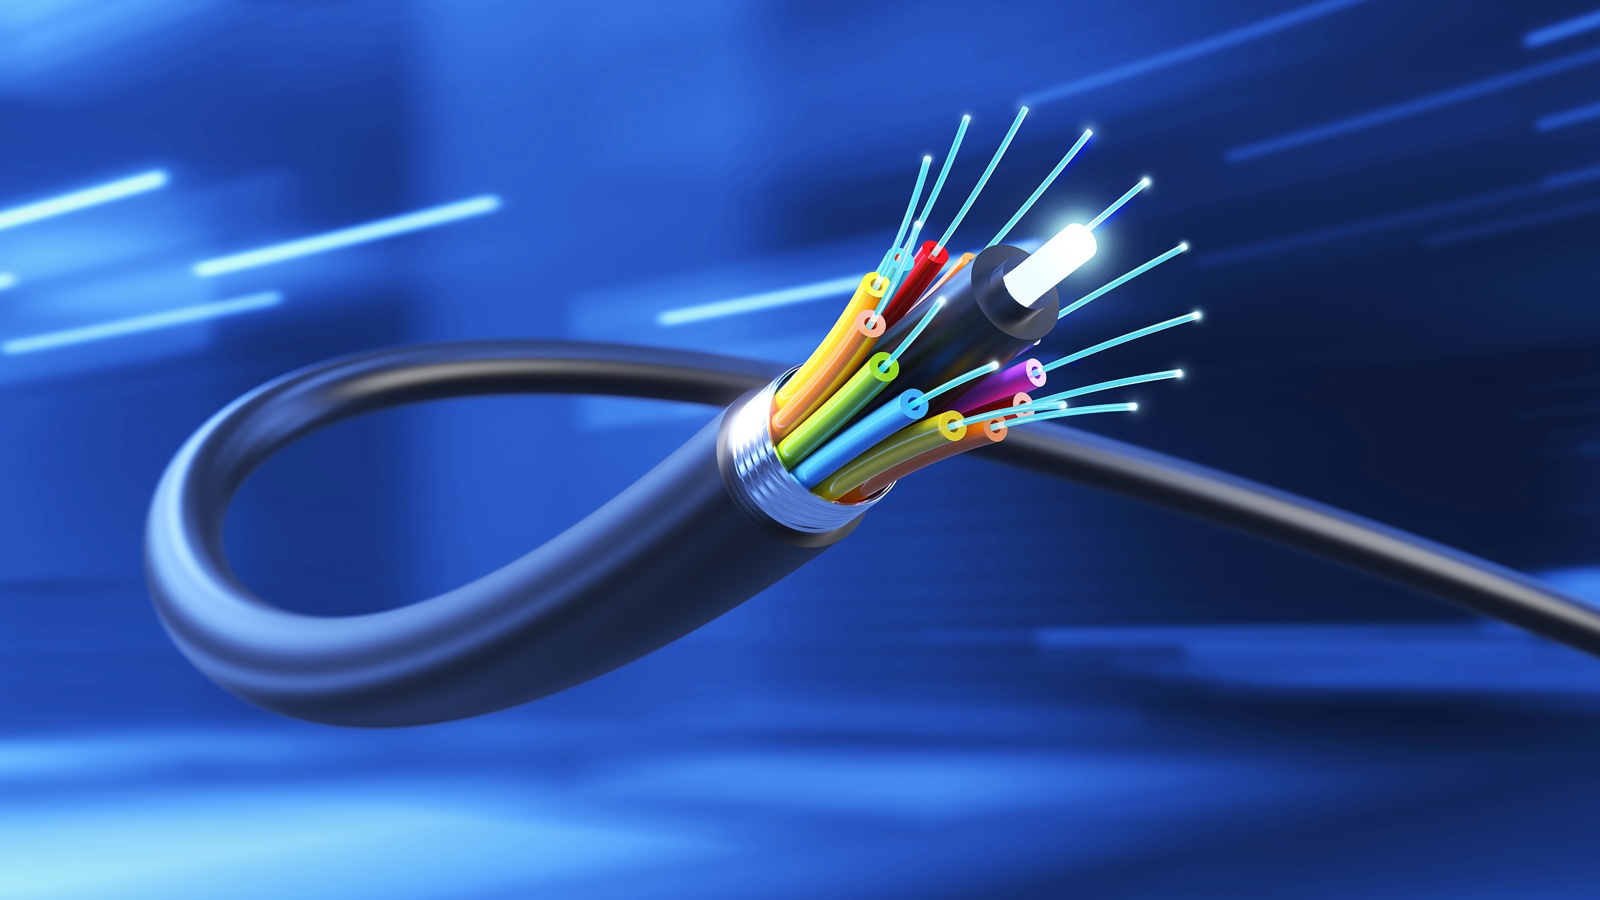 New internet speed world record set using standard commercially-available optical fibre